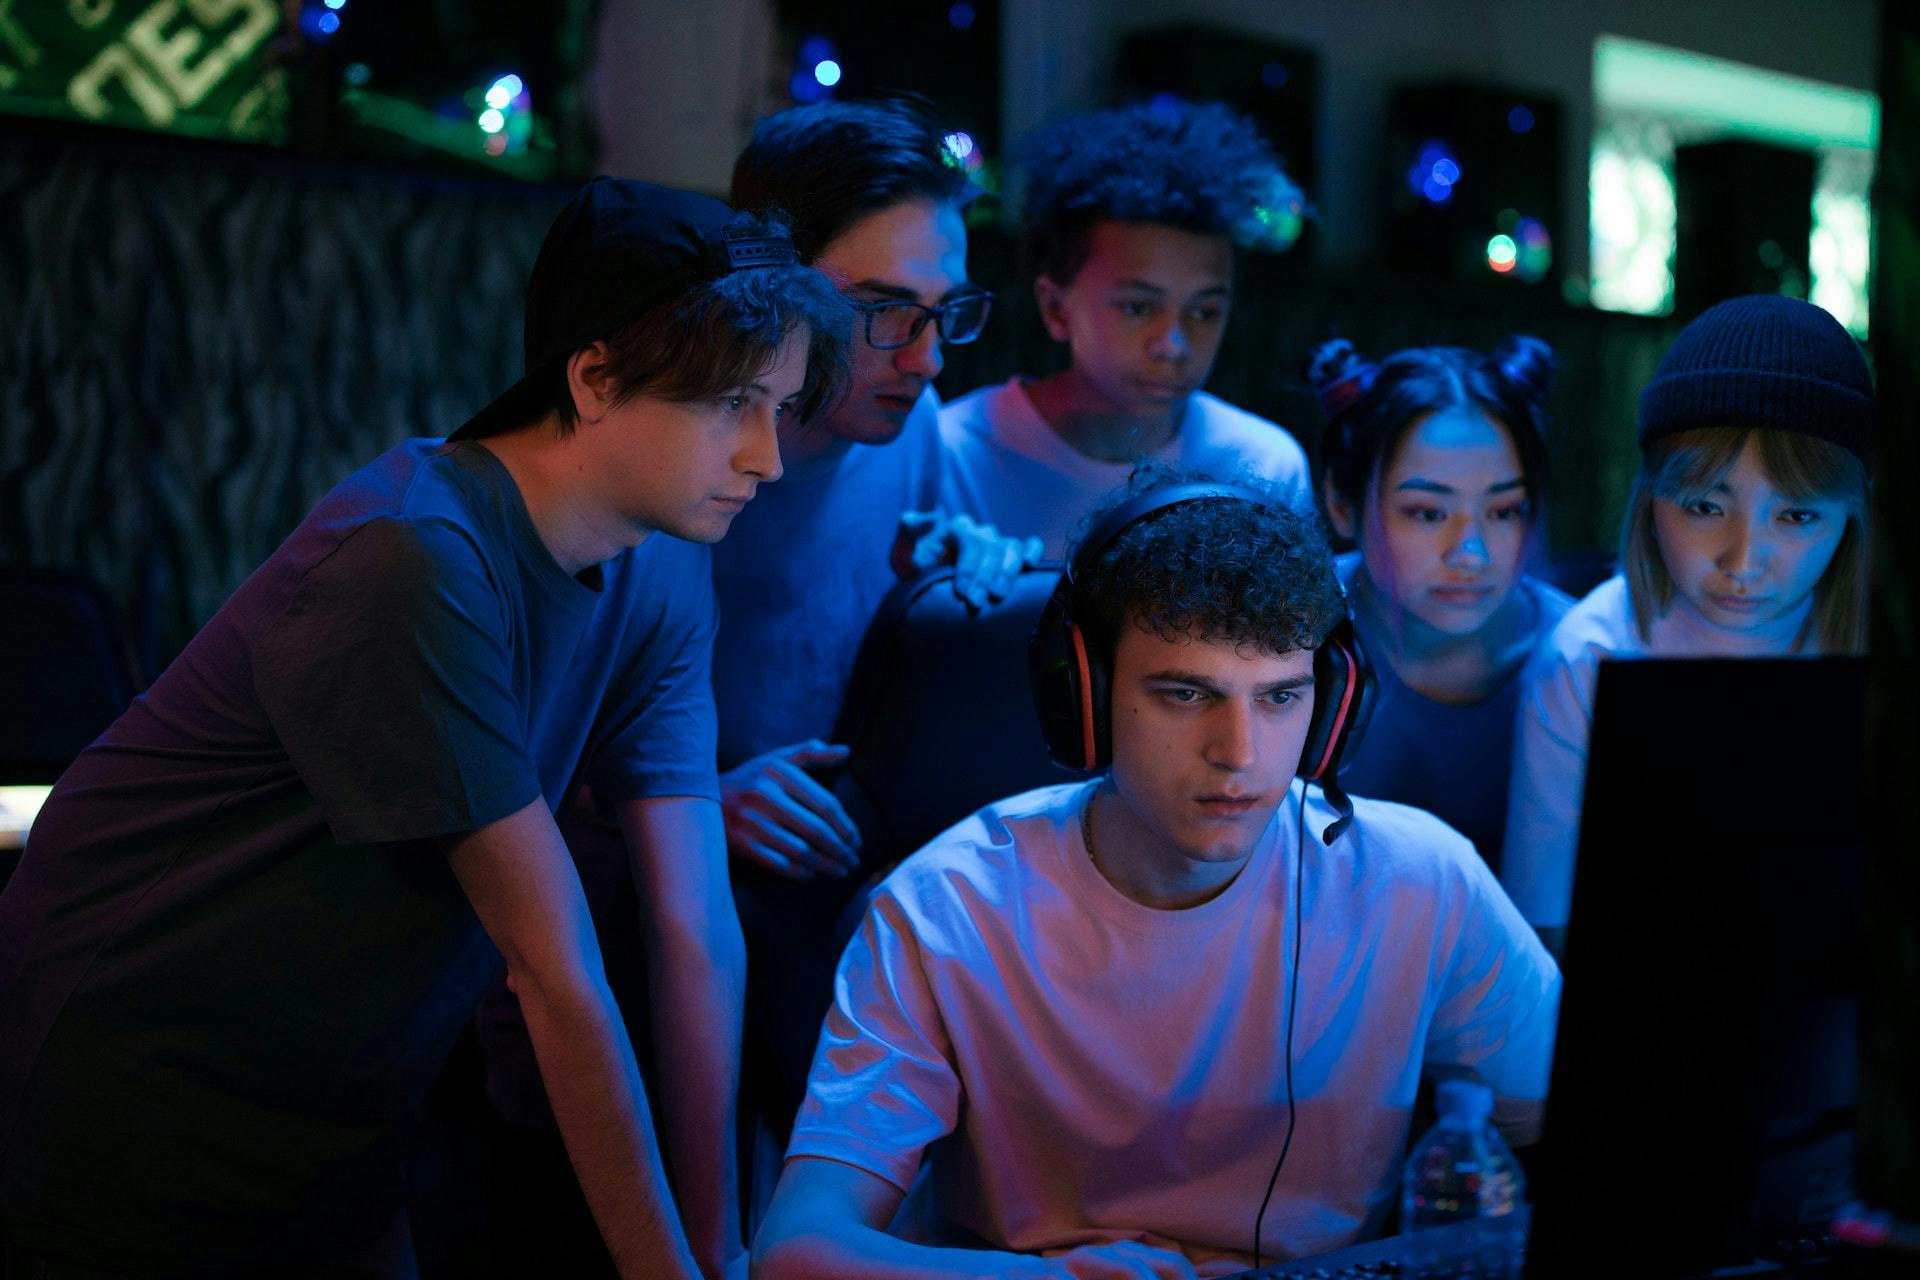 group of young people gaming at a desktop computer